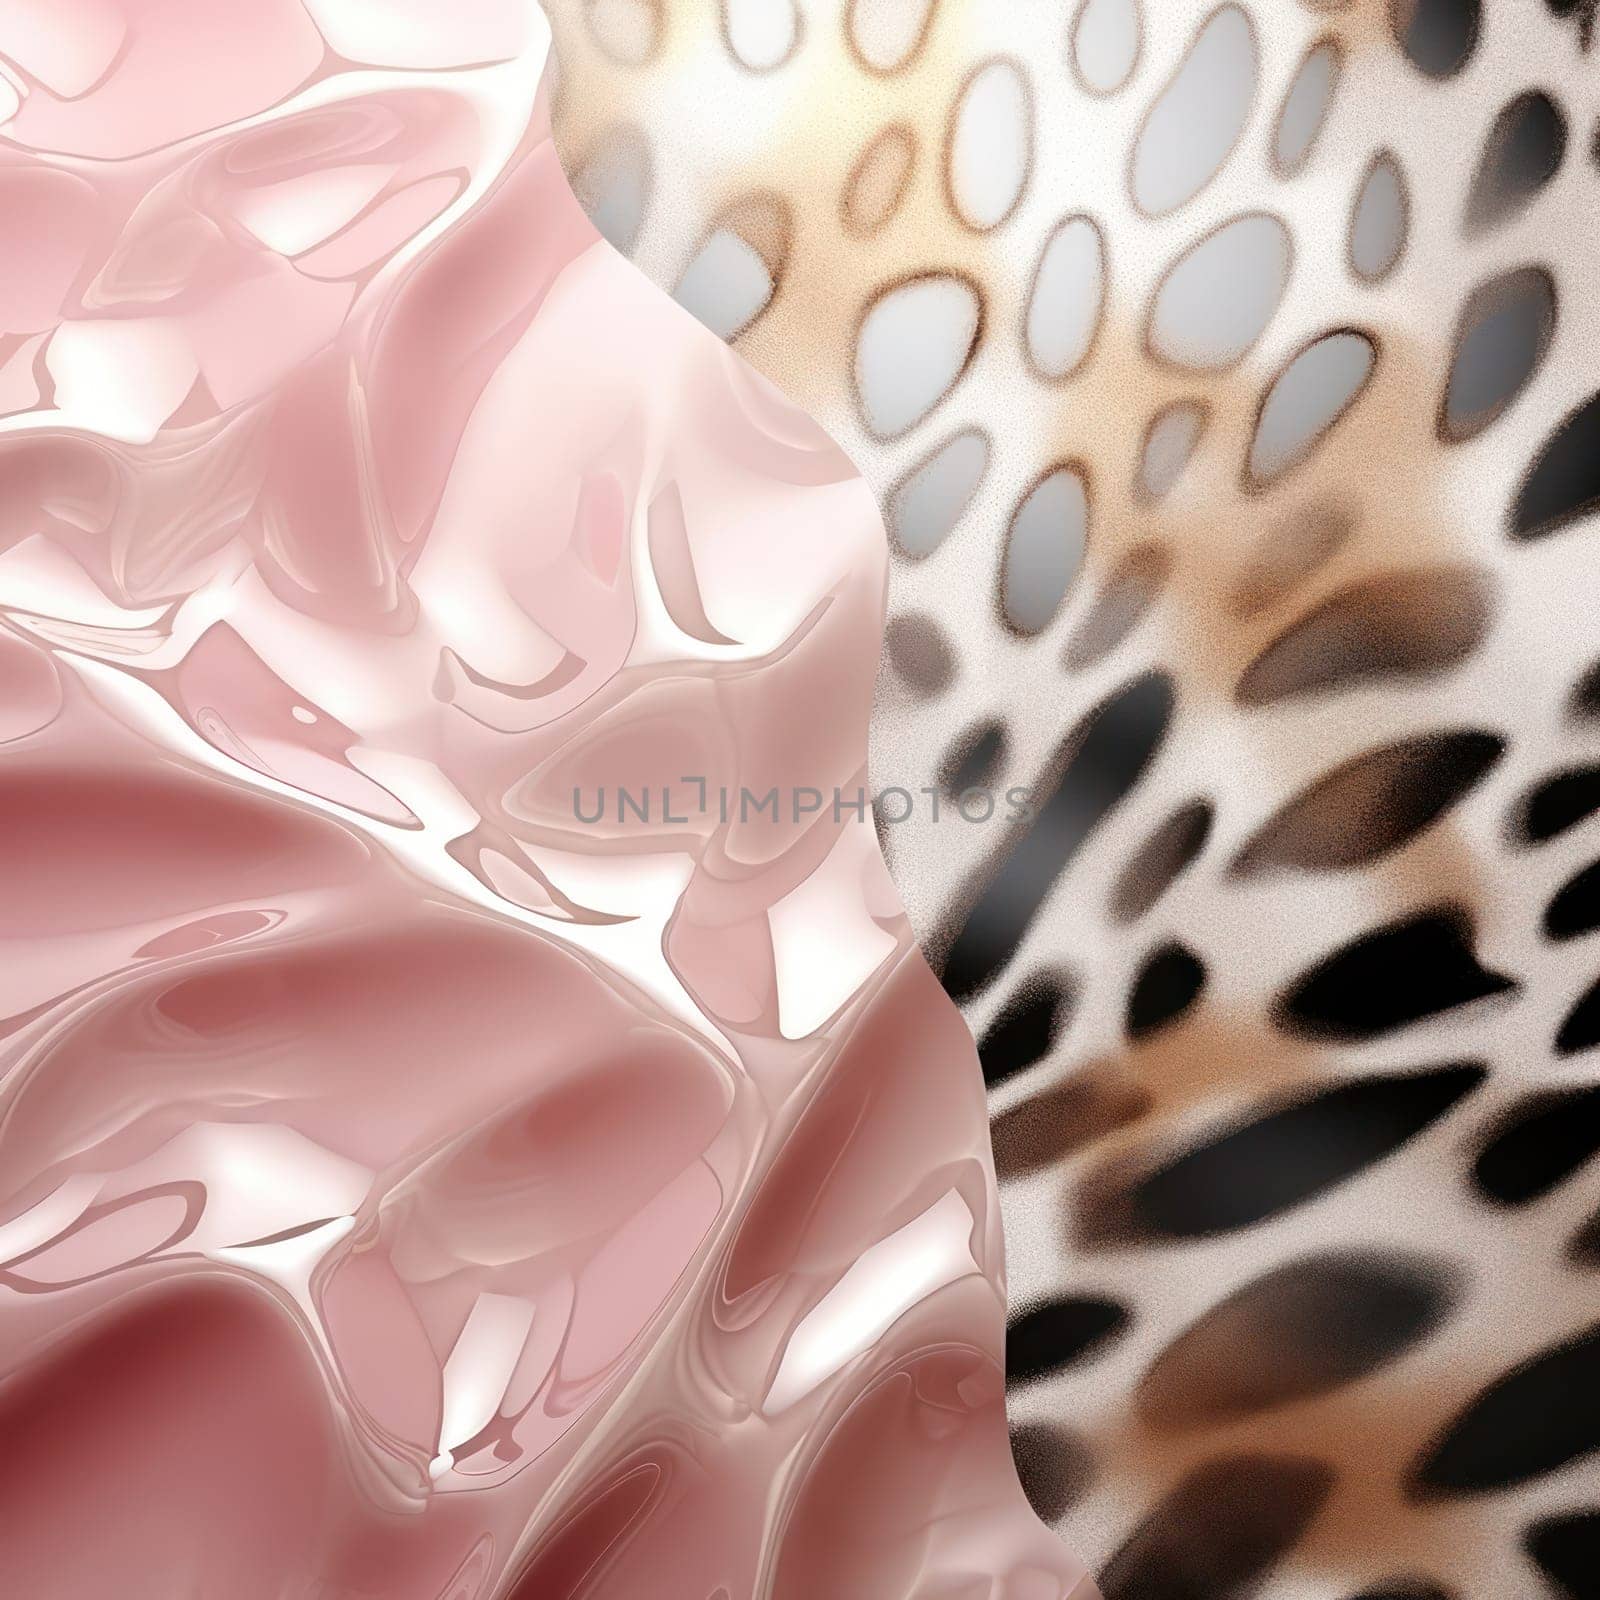 Abstract Pink Wave: A Colorful Gradient of Smooth Patterns on a White Background by Vichizh